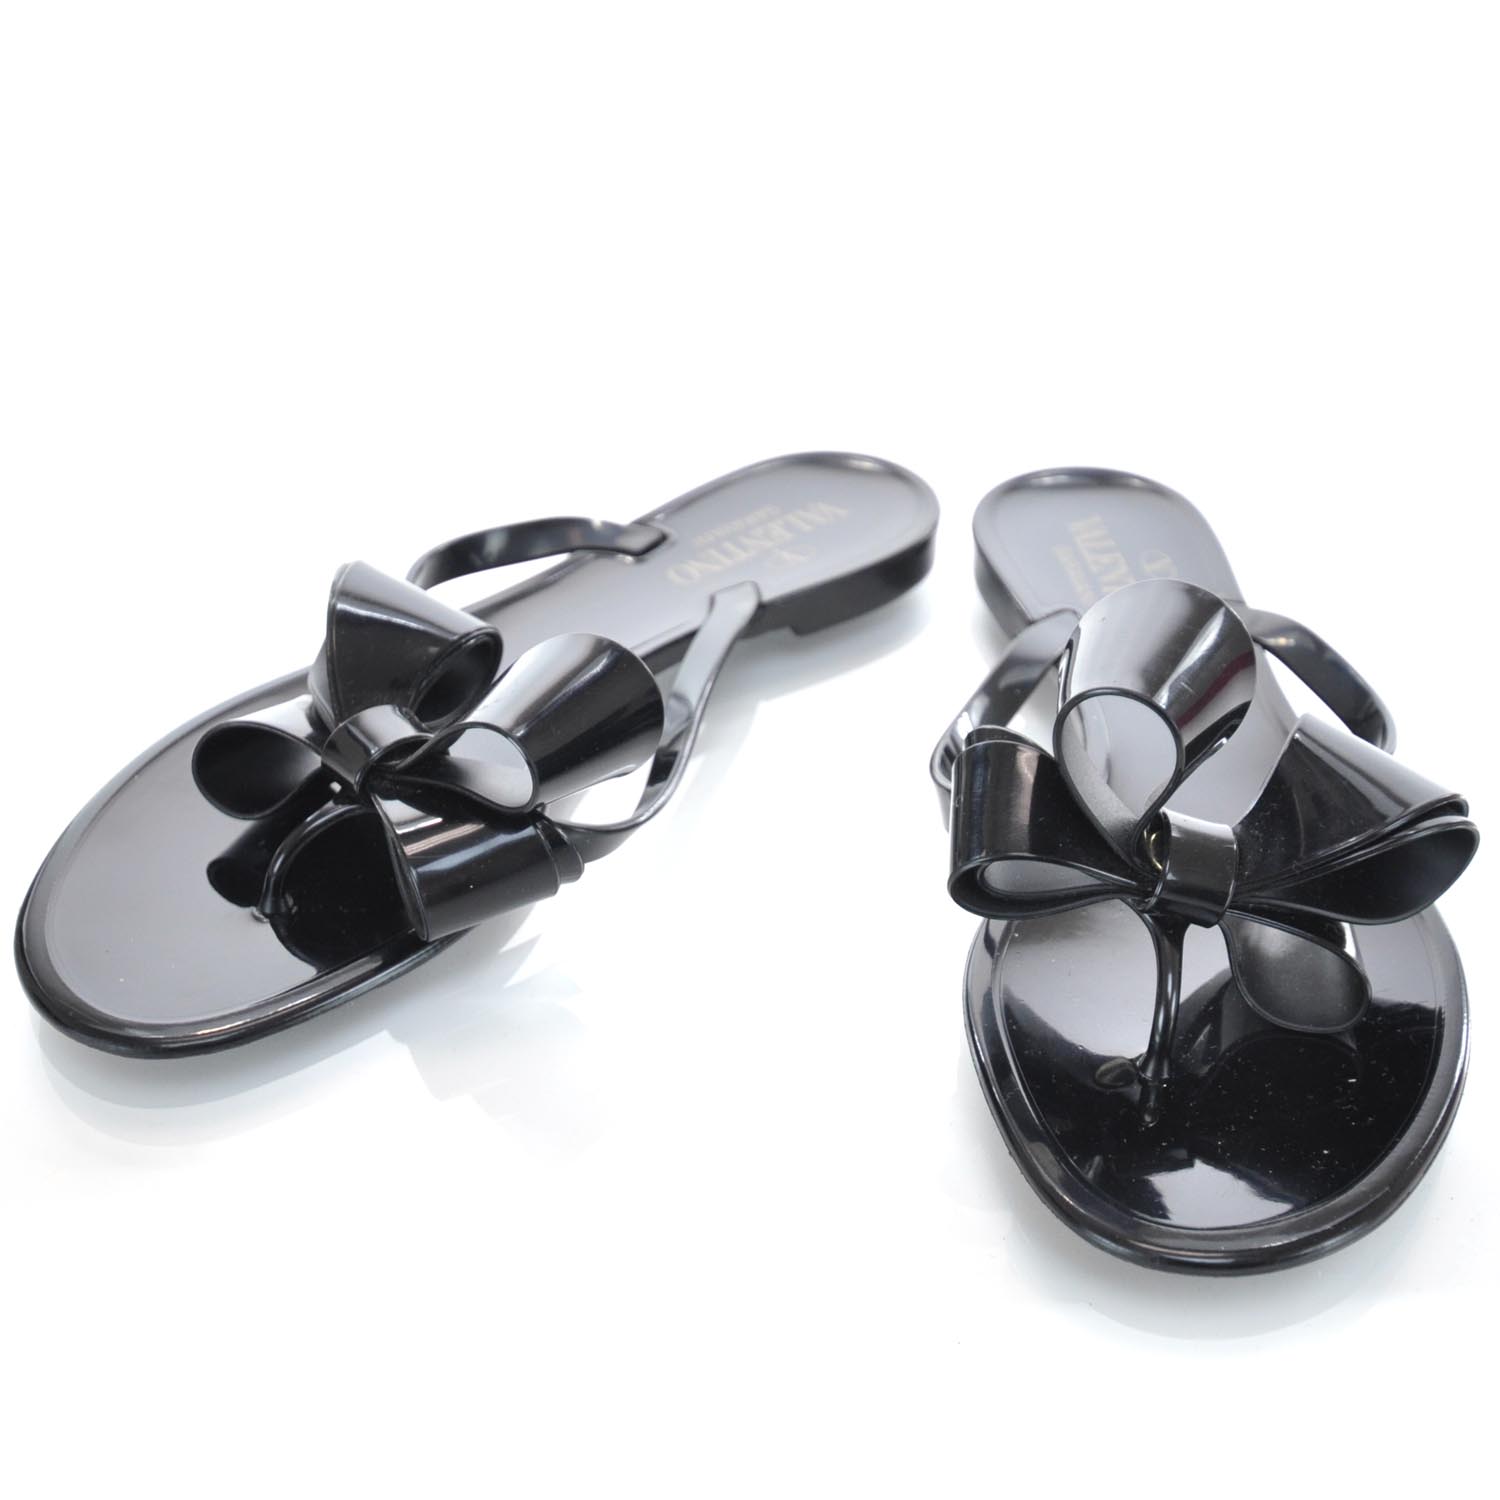 VALENTINO Jelly Couture Bow Flip Flops 38 Black 27622